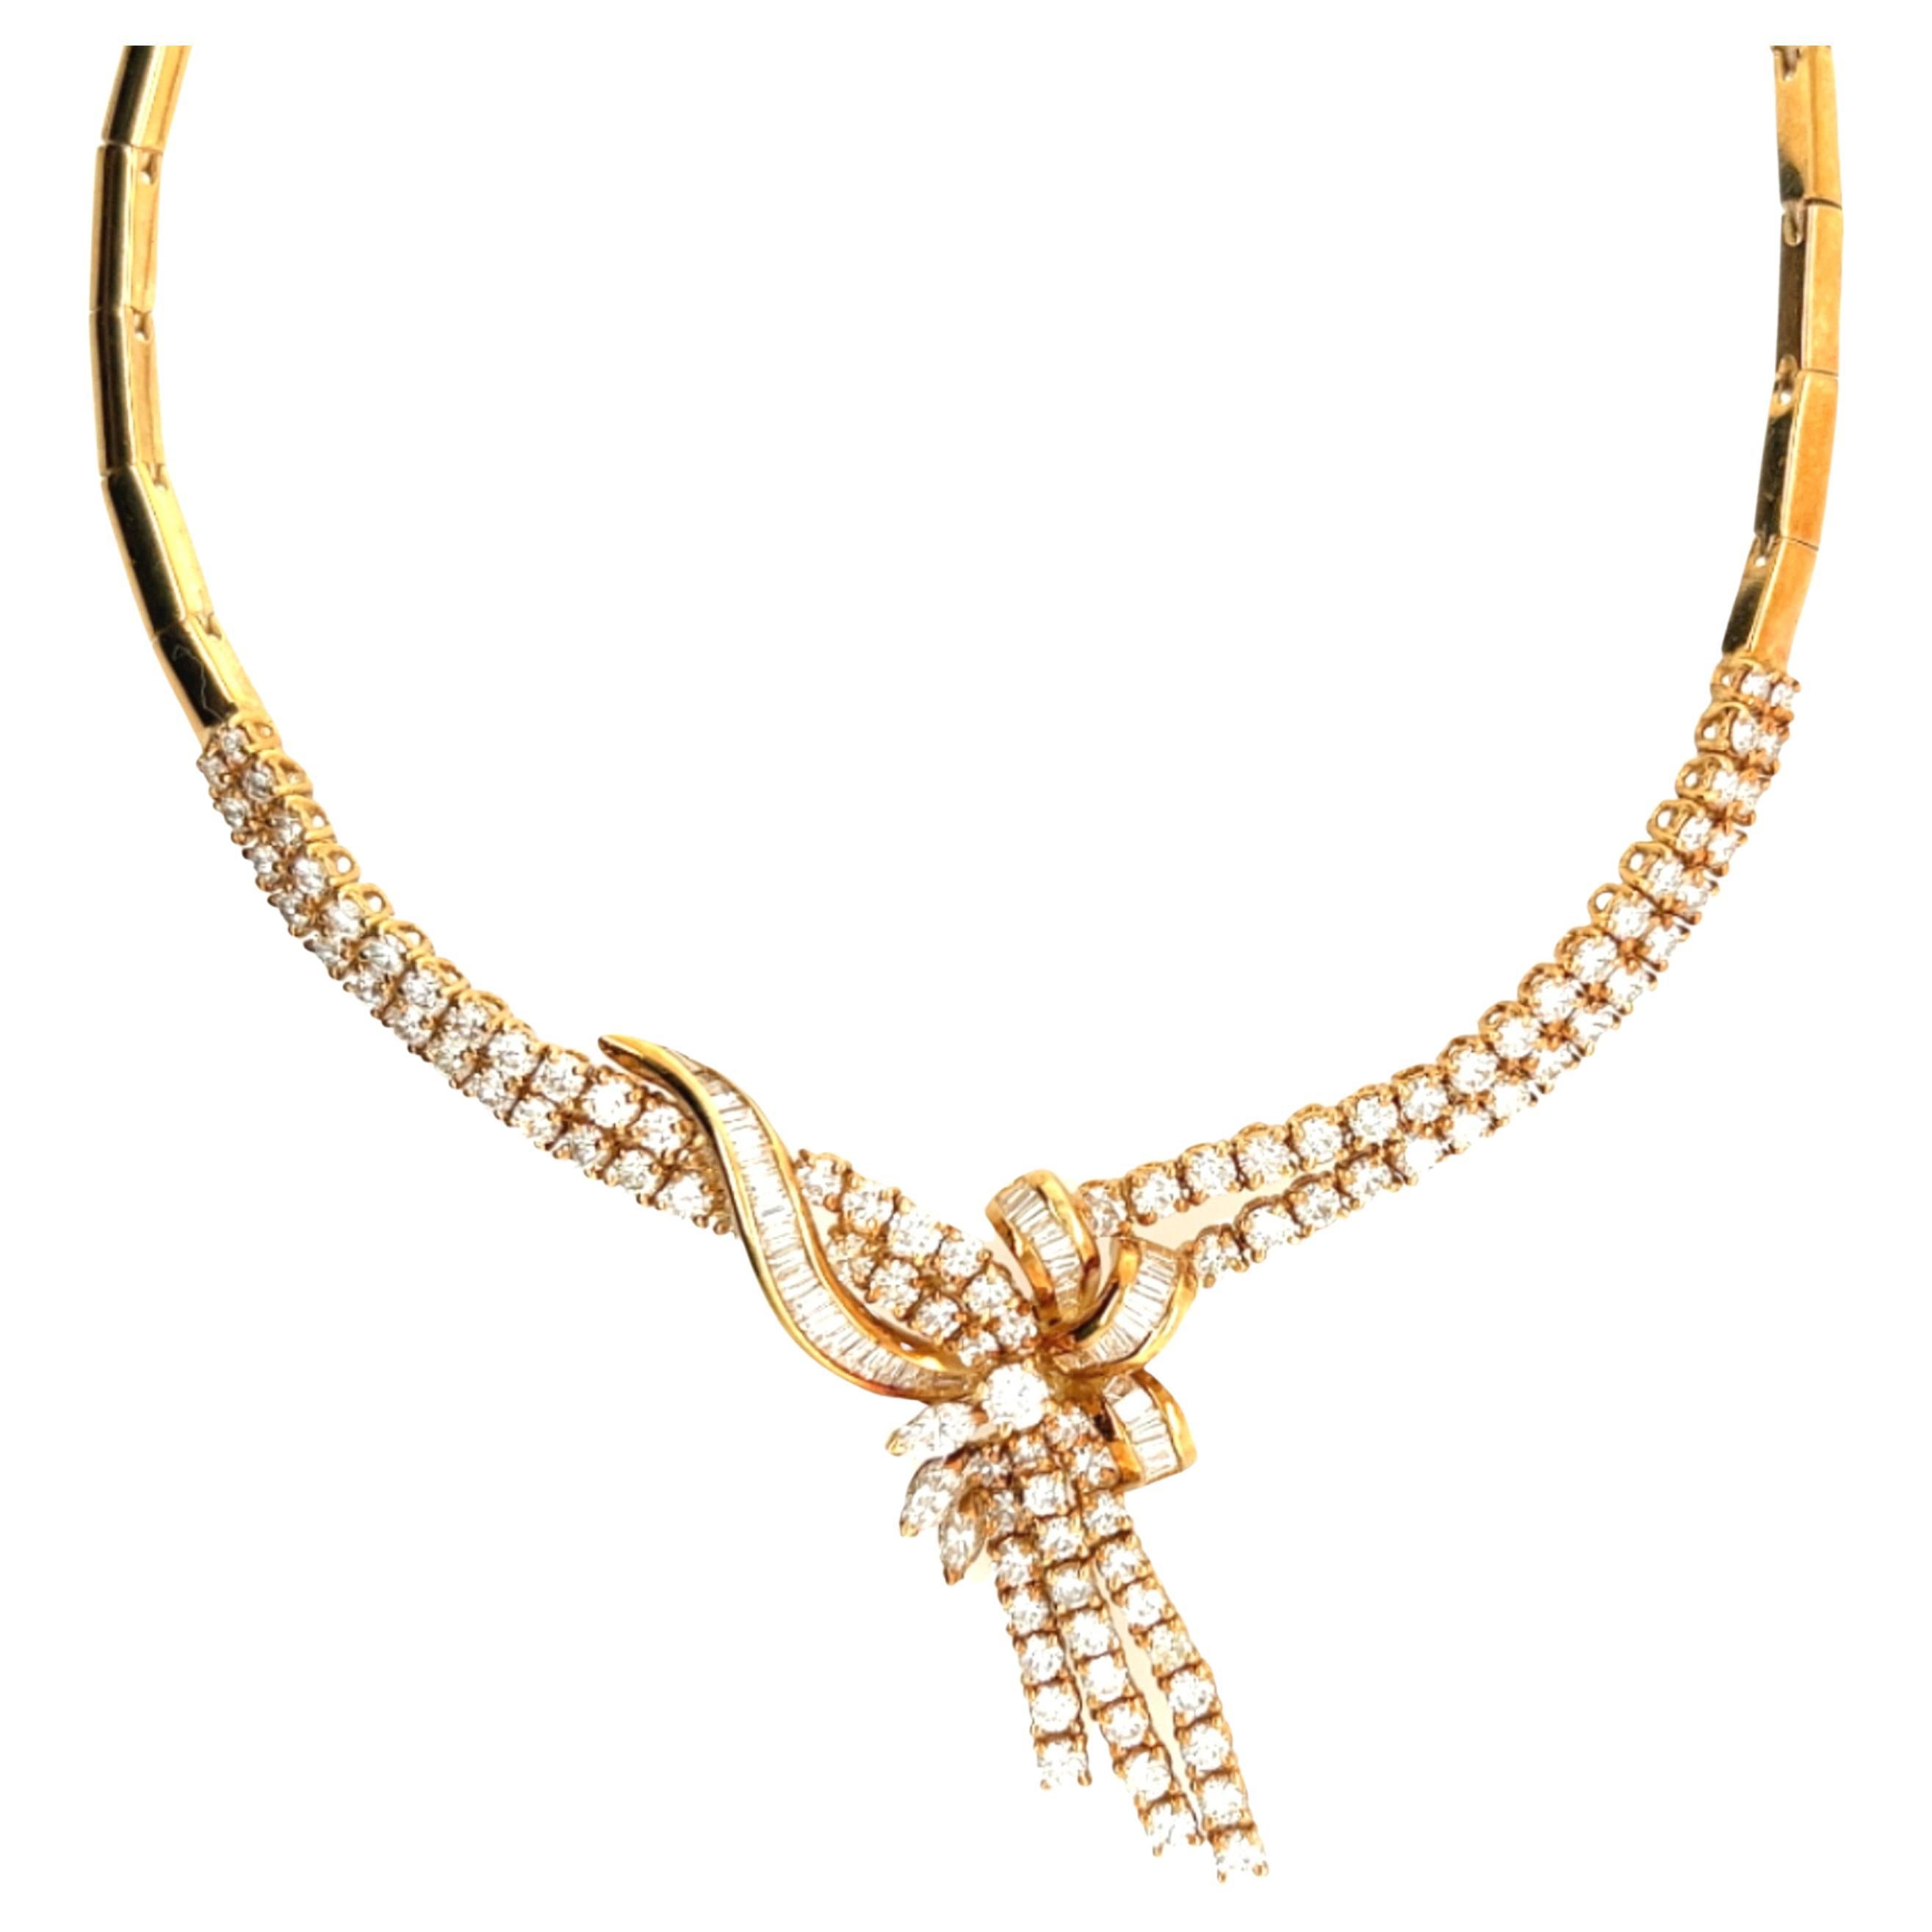 6+ Carat Diamond Necklace in 18kt Gold 